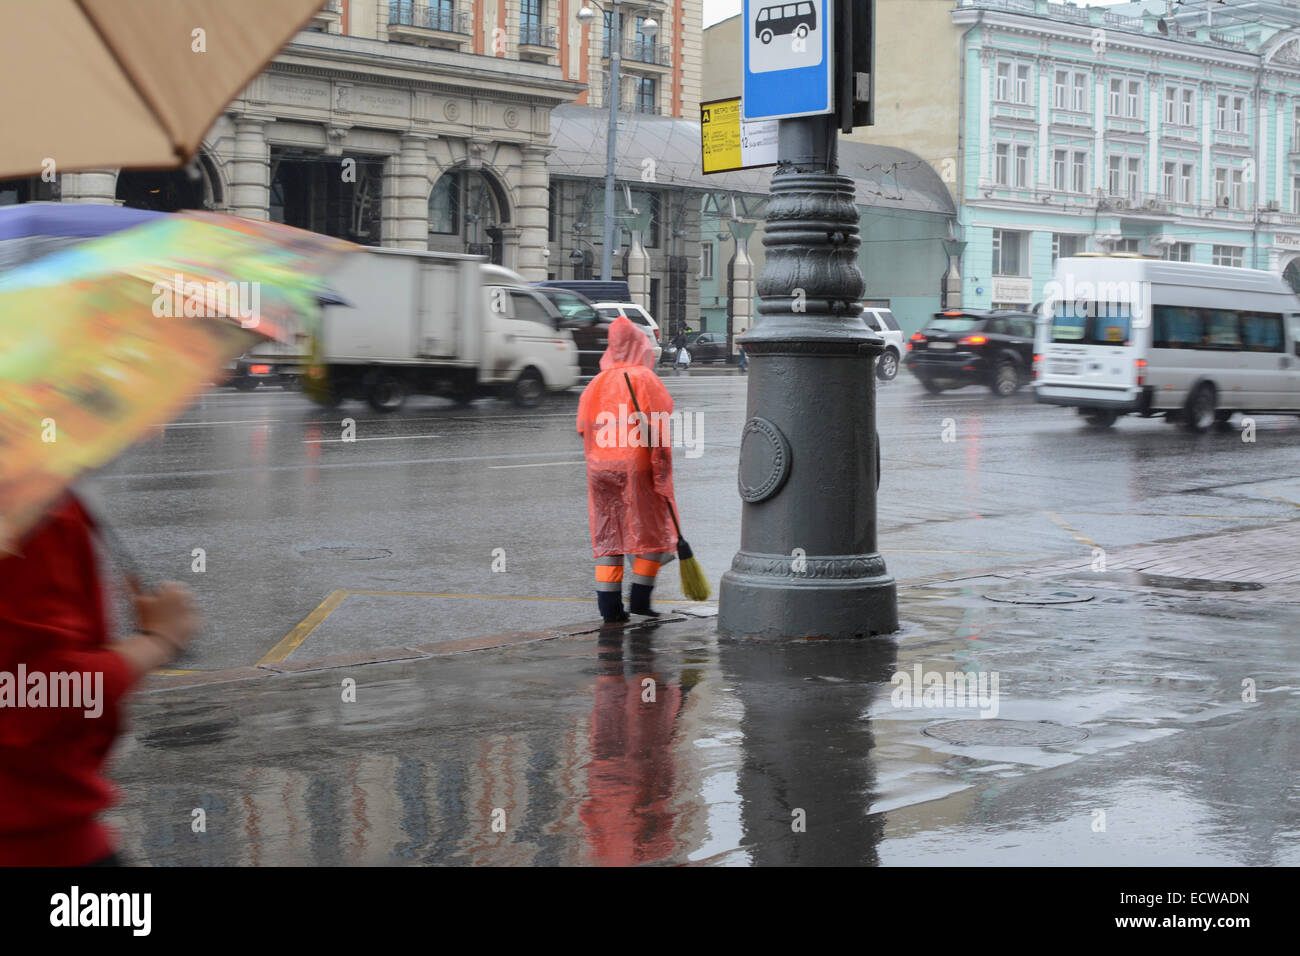 A street cleaner wearing a bright orange waterproof jacket on a rainy street in Moscow Stock Photo